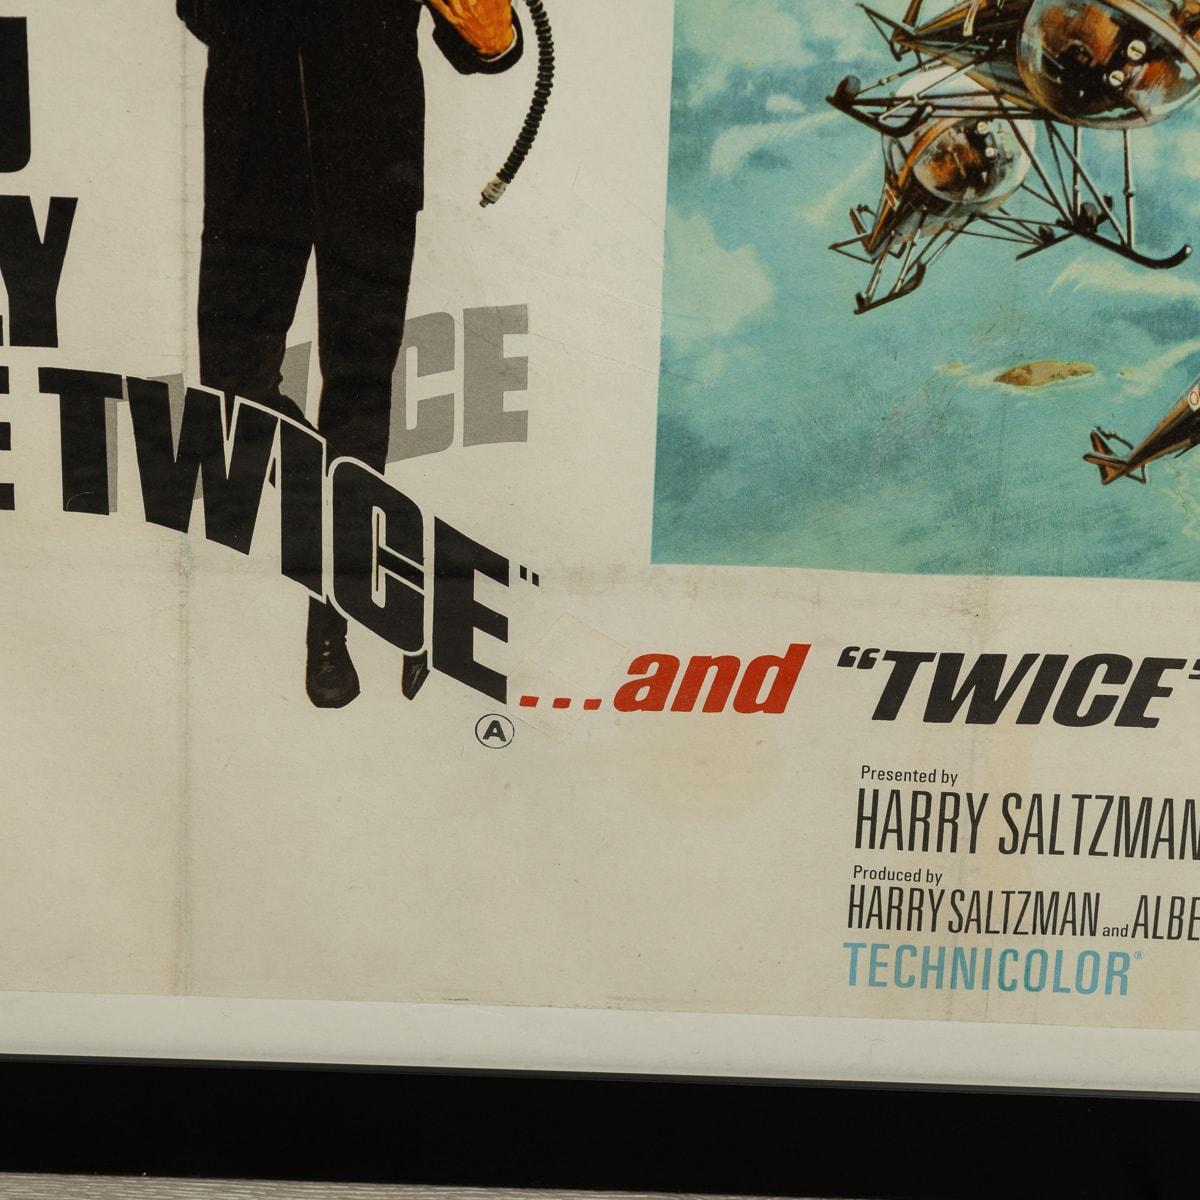 Acrylic 'You Only Live Twice' (1967) Poster, British, Style B (Little Nelly) For Sale